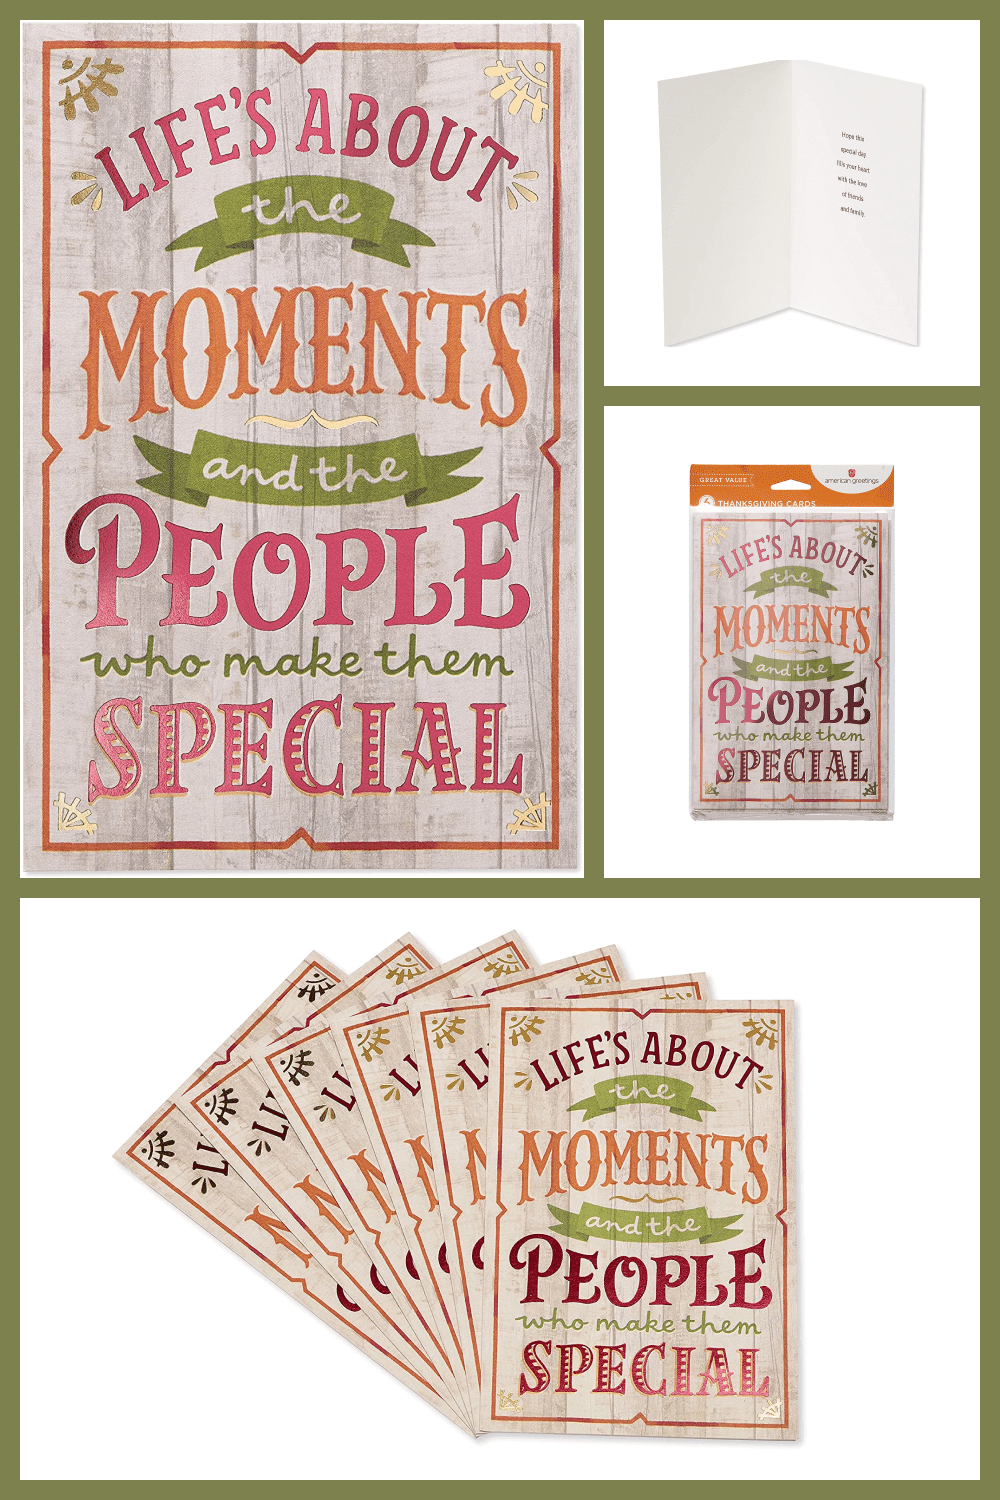 American Greetings Thanksgiving Cards, Moments.